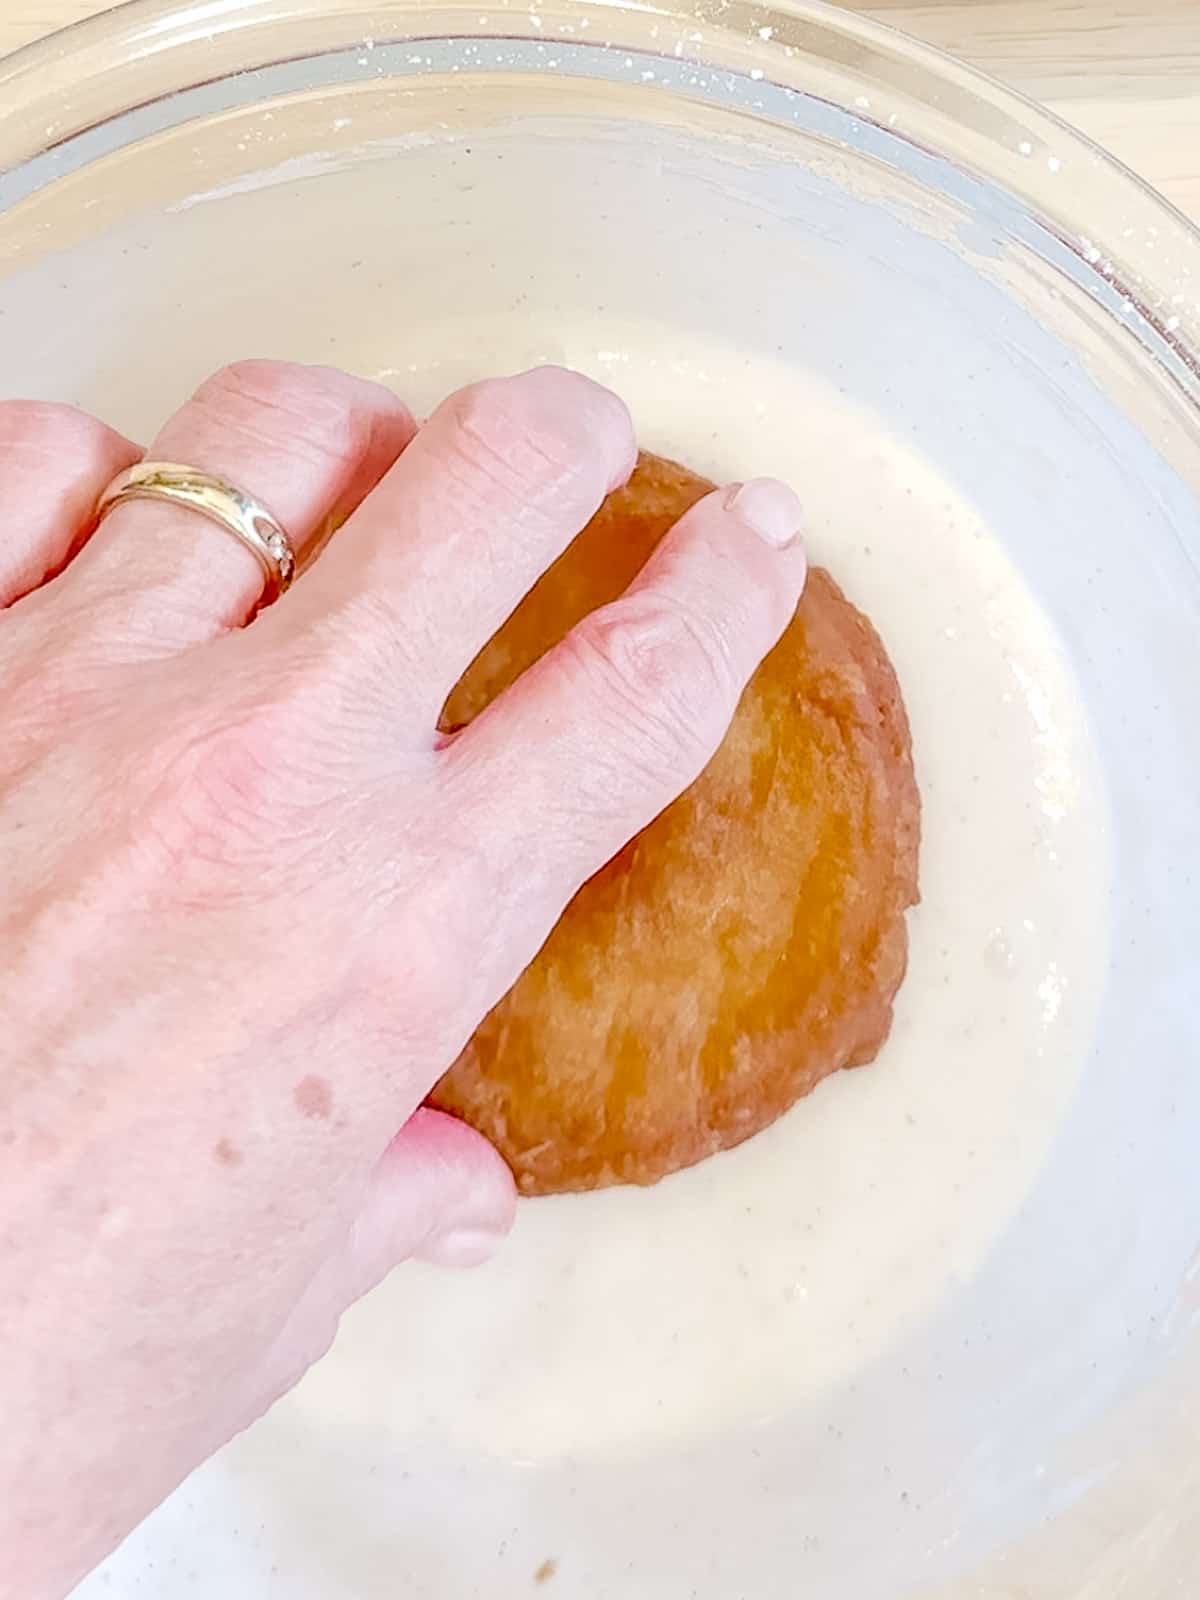 Dunking a donut in glaze.